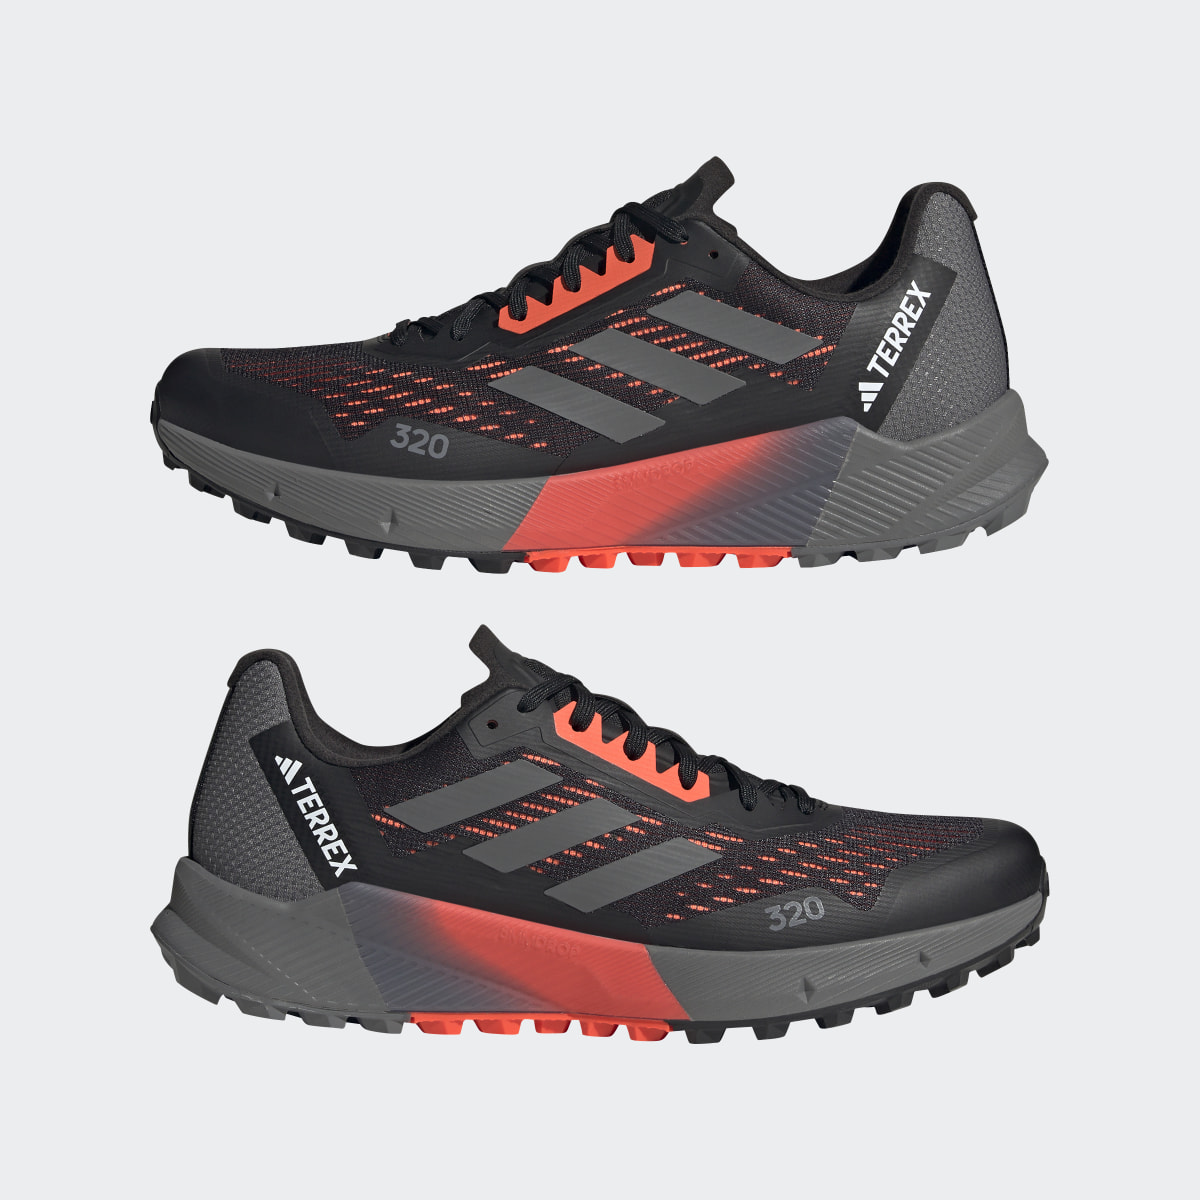 Adidas Terrex Agravic Flow 2.0 Trail Running Shoes. 8